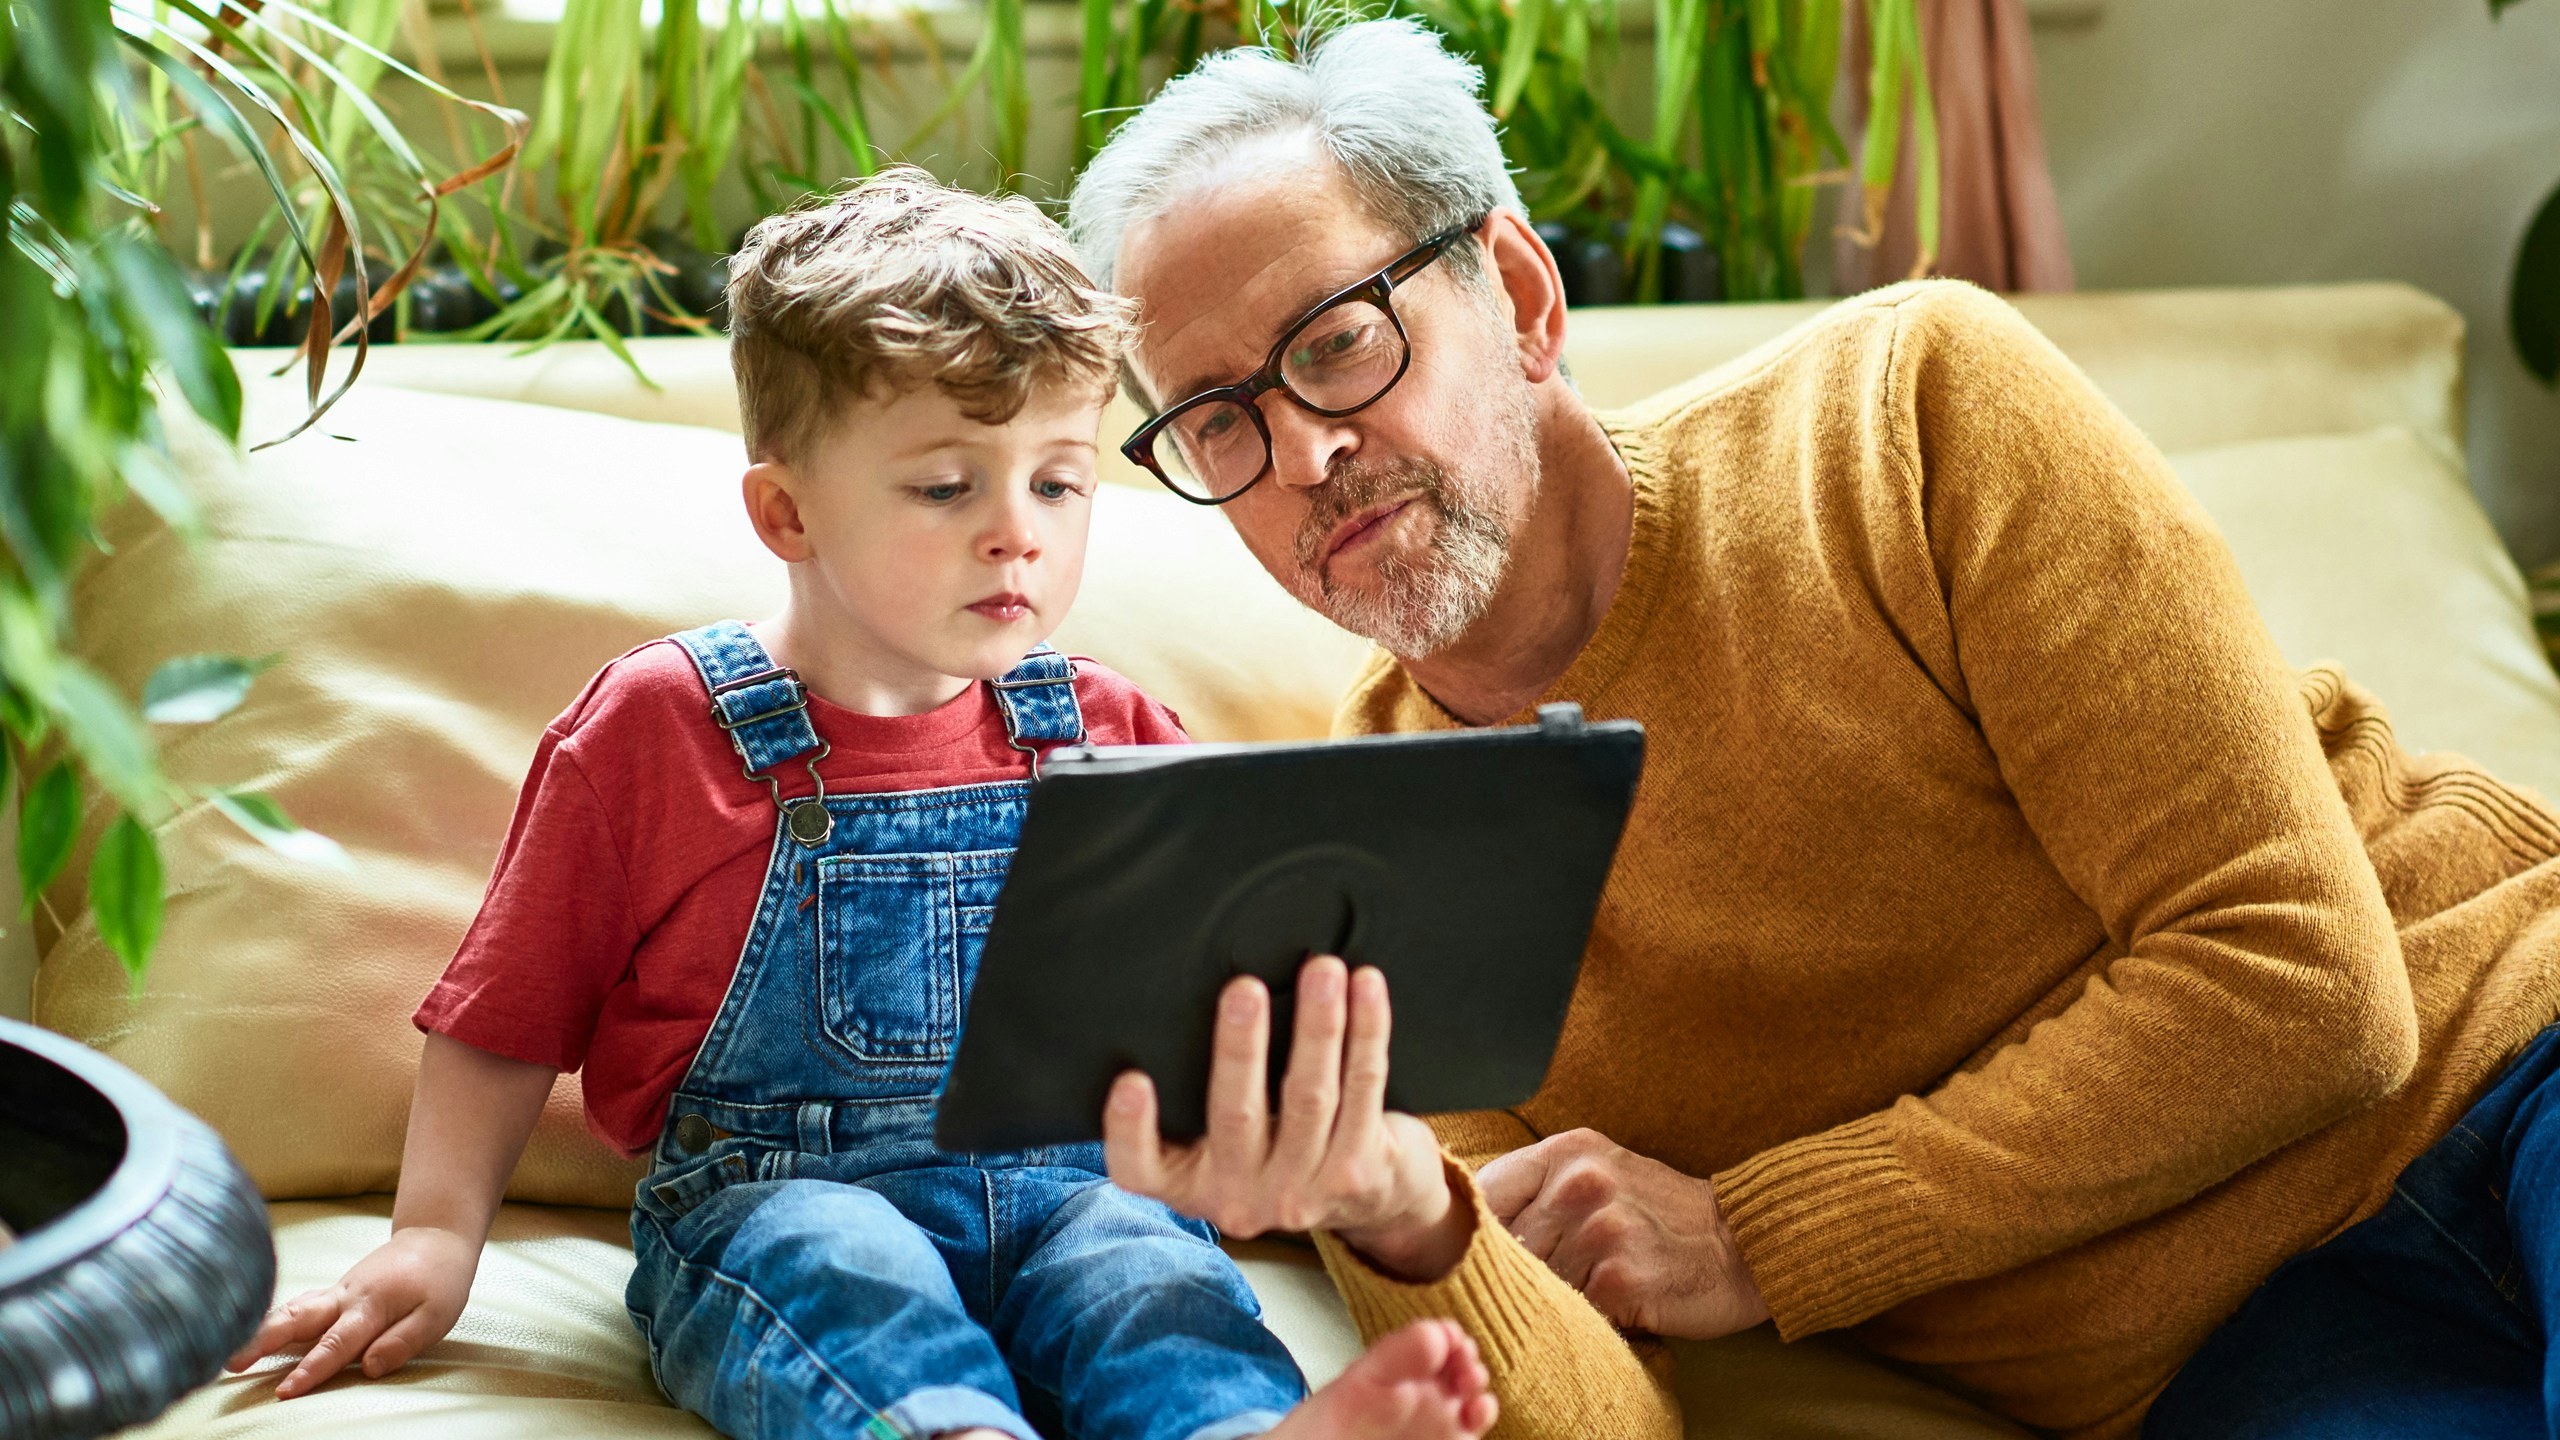 Image of grandad with yellow jumper sitting showing his young grandson something on a tablet device